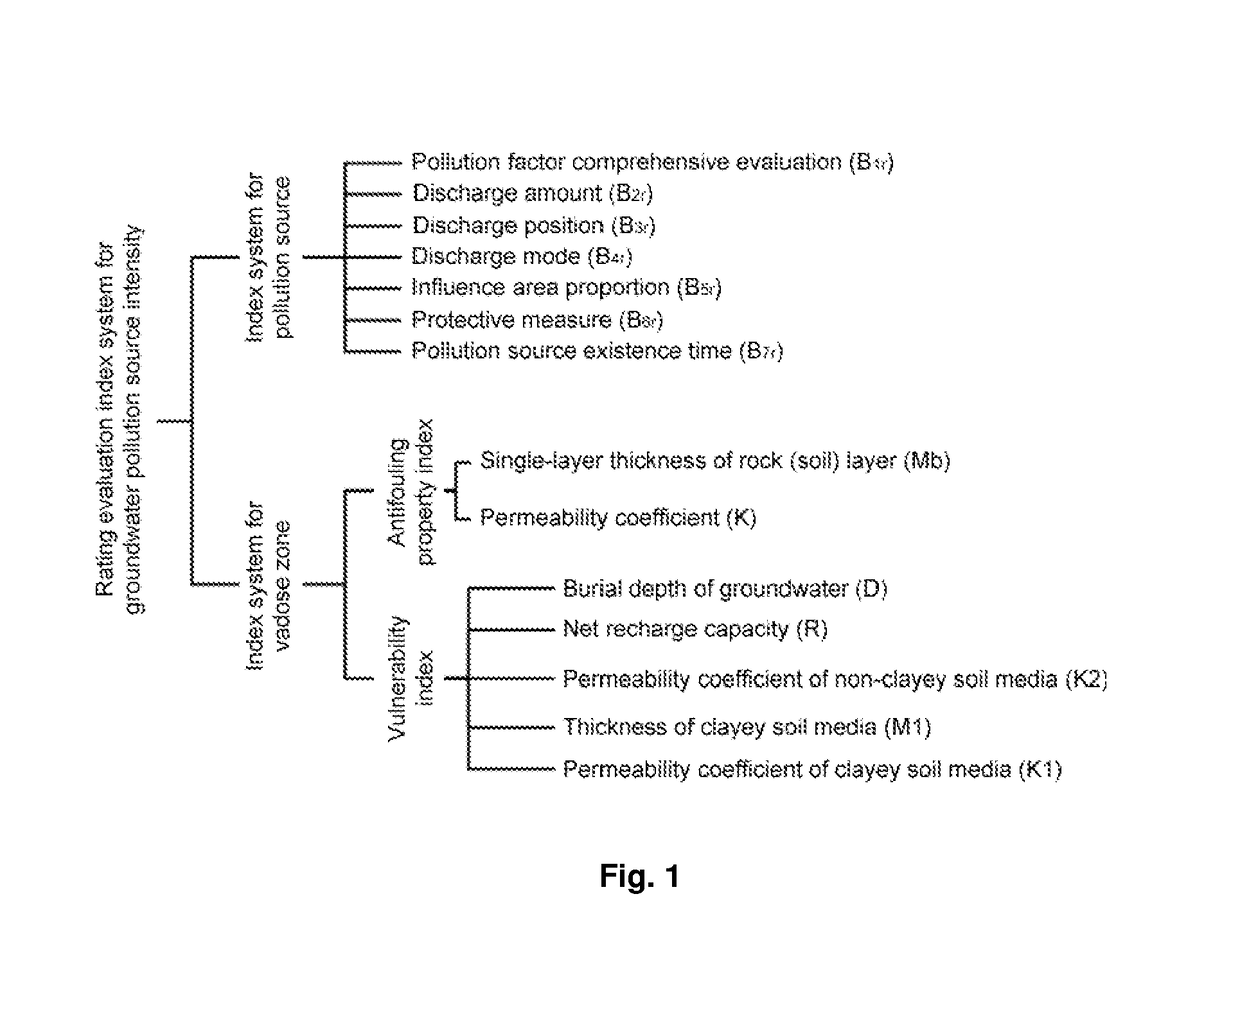 Rating evaluation method for groundwater pollution source intensity